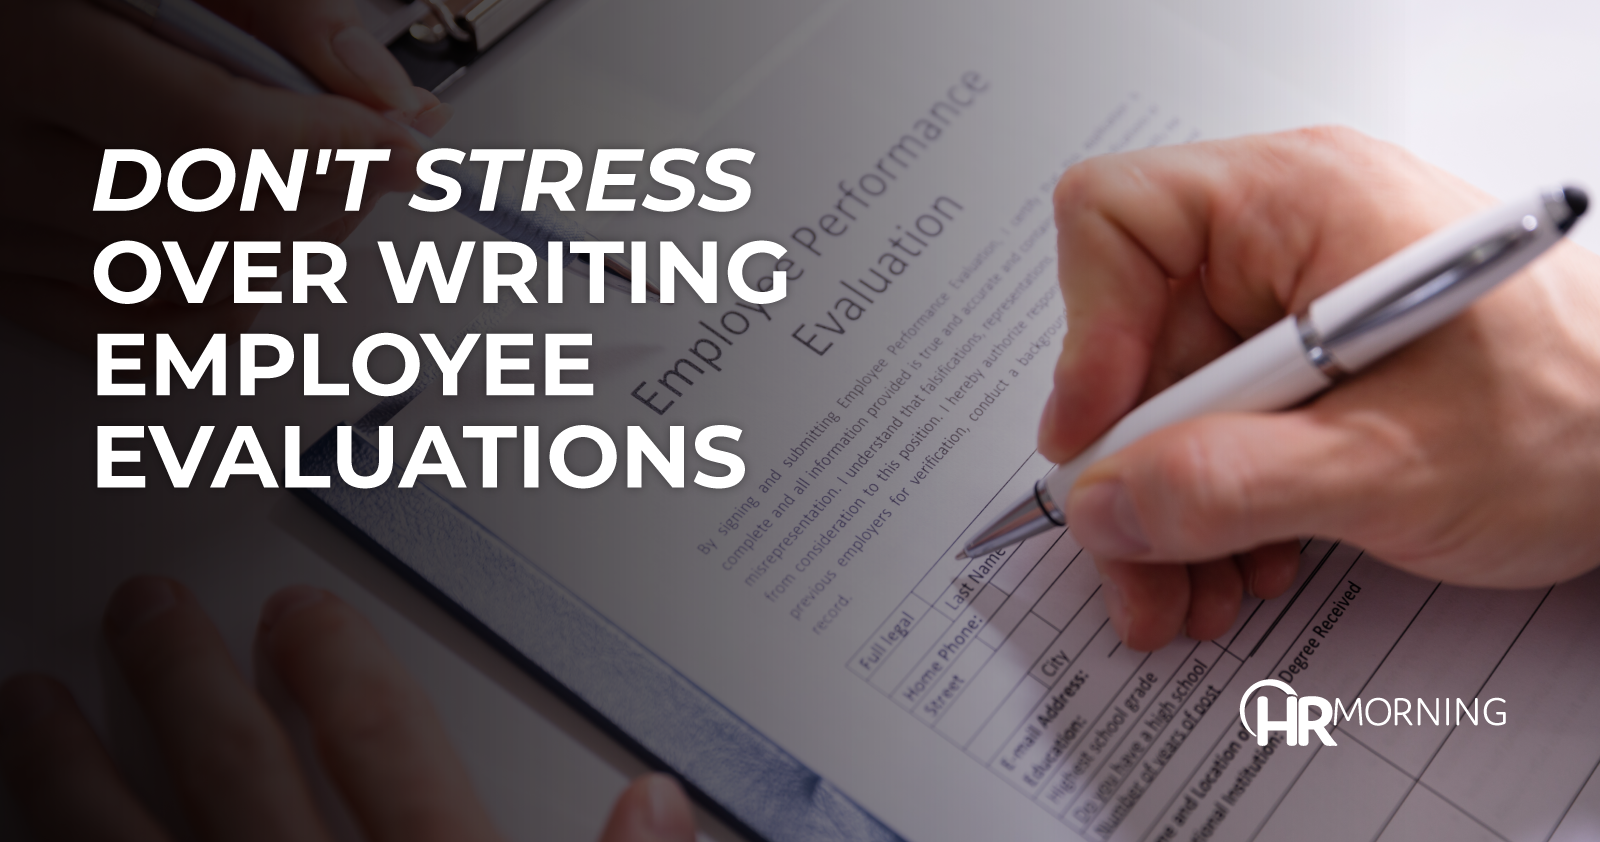 Don't stress over writing employee evaluations